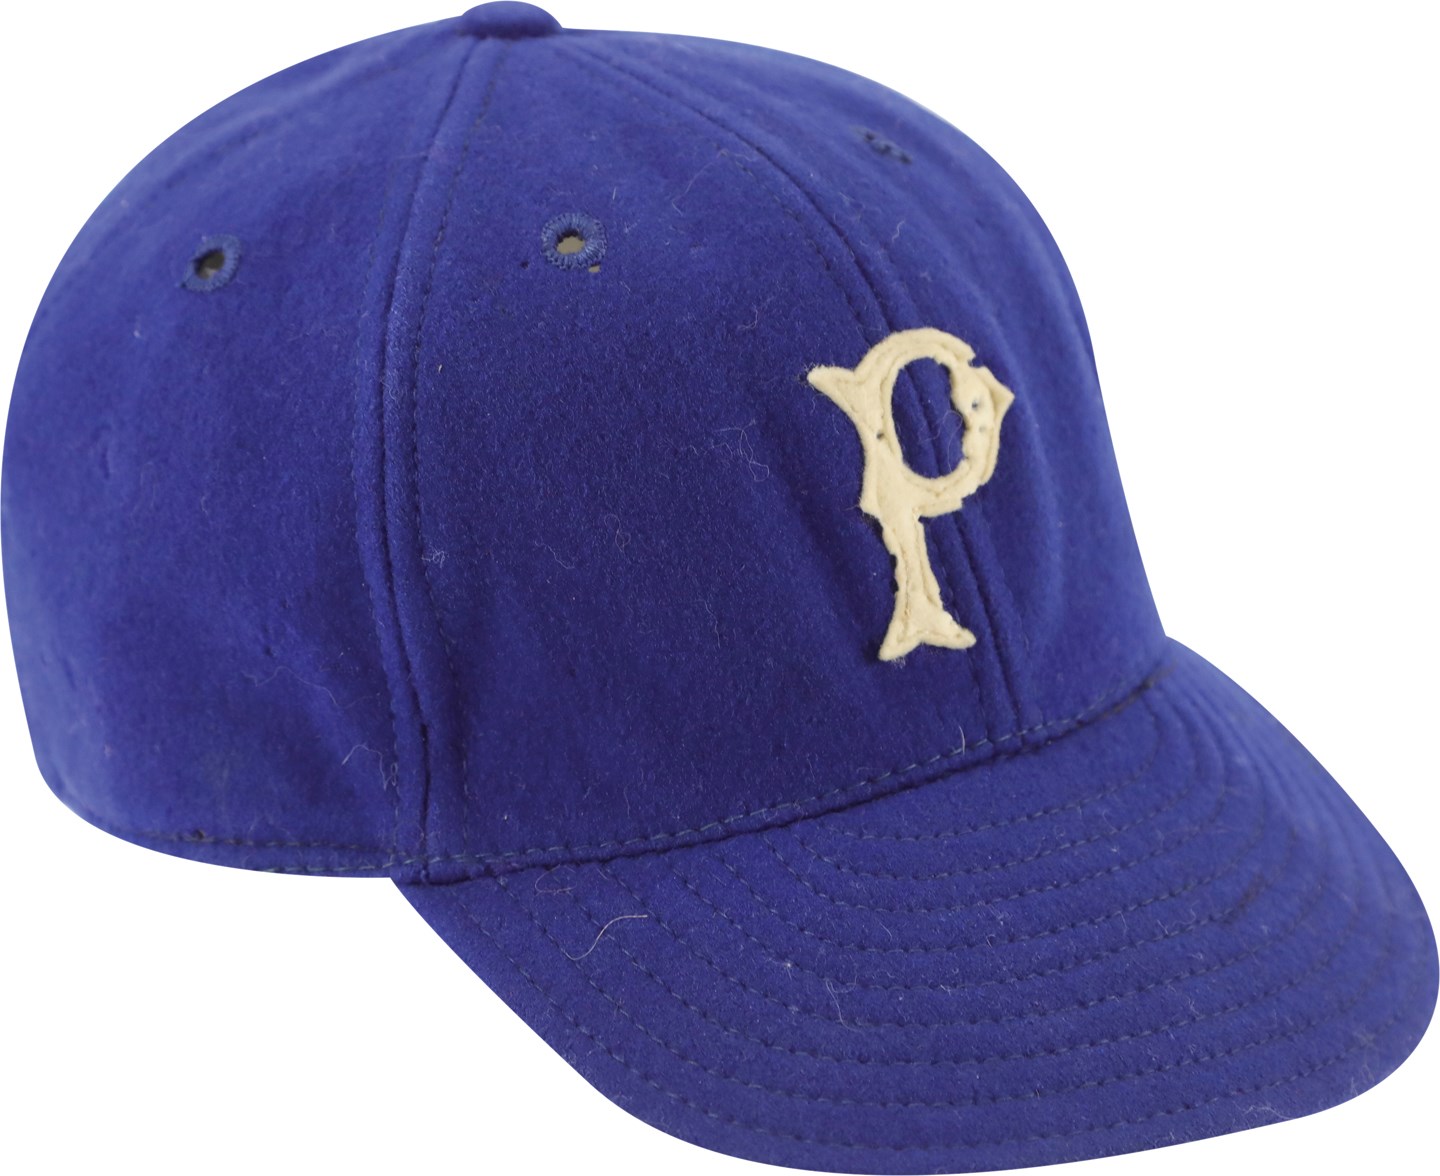 Clemente and Pittsburgh Pirates - Mid-1940s Pete Coscarart Pittsburgh Pirates Game Worn Cap